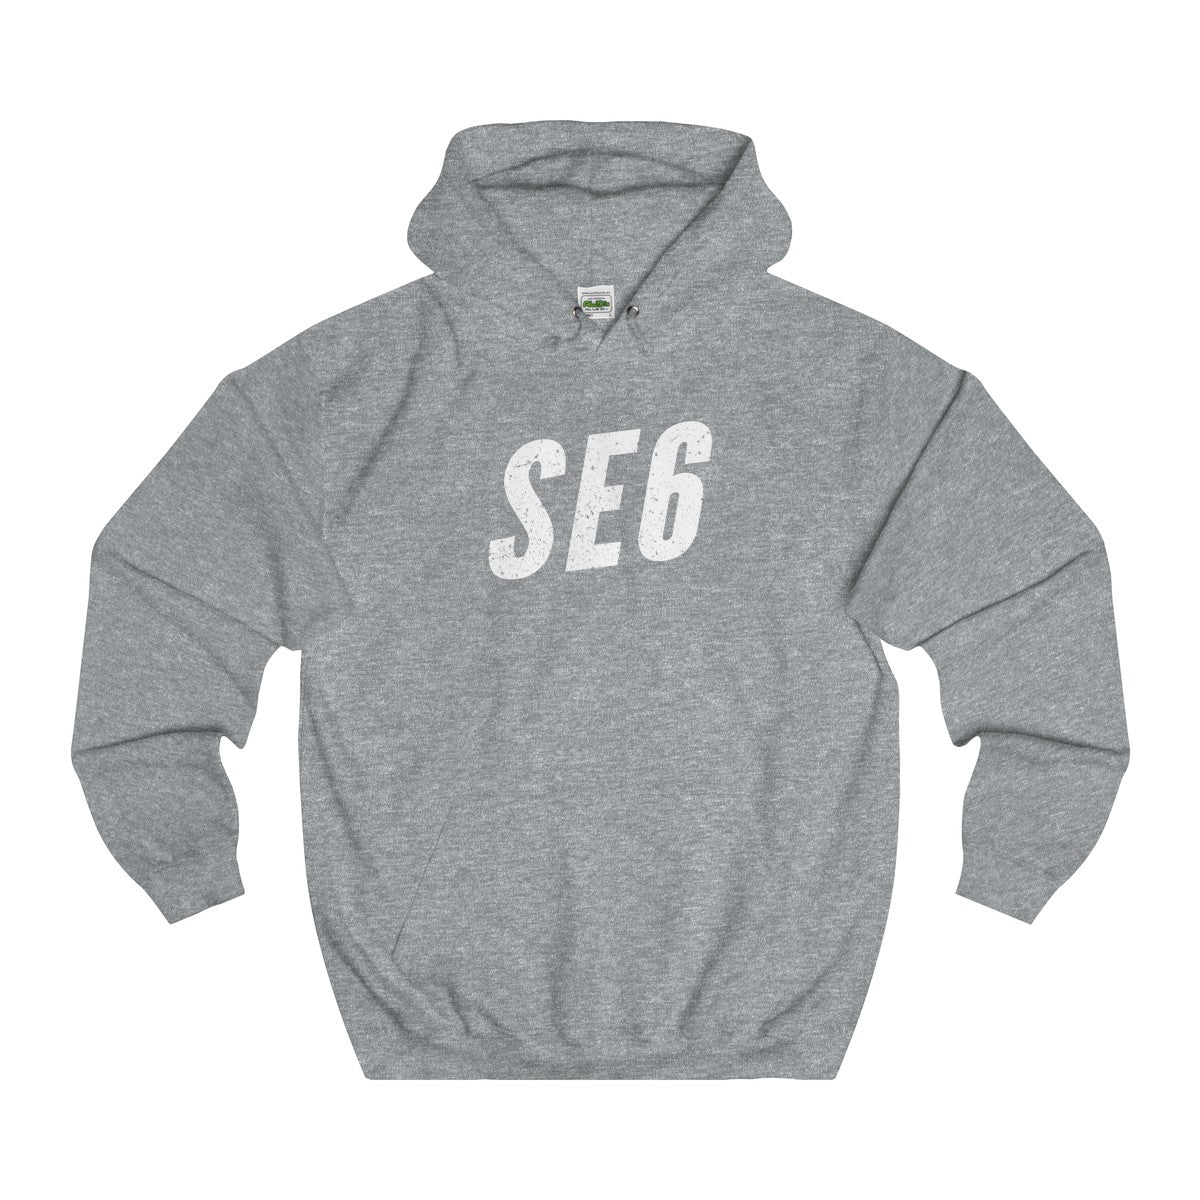 Hither Green SE6 Hoodie